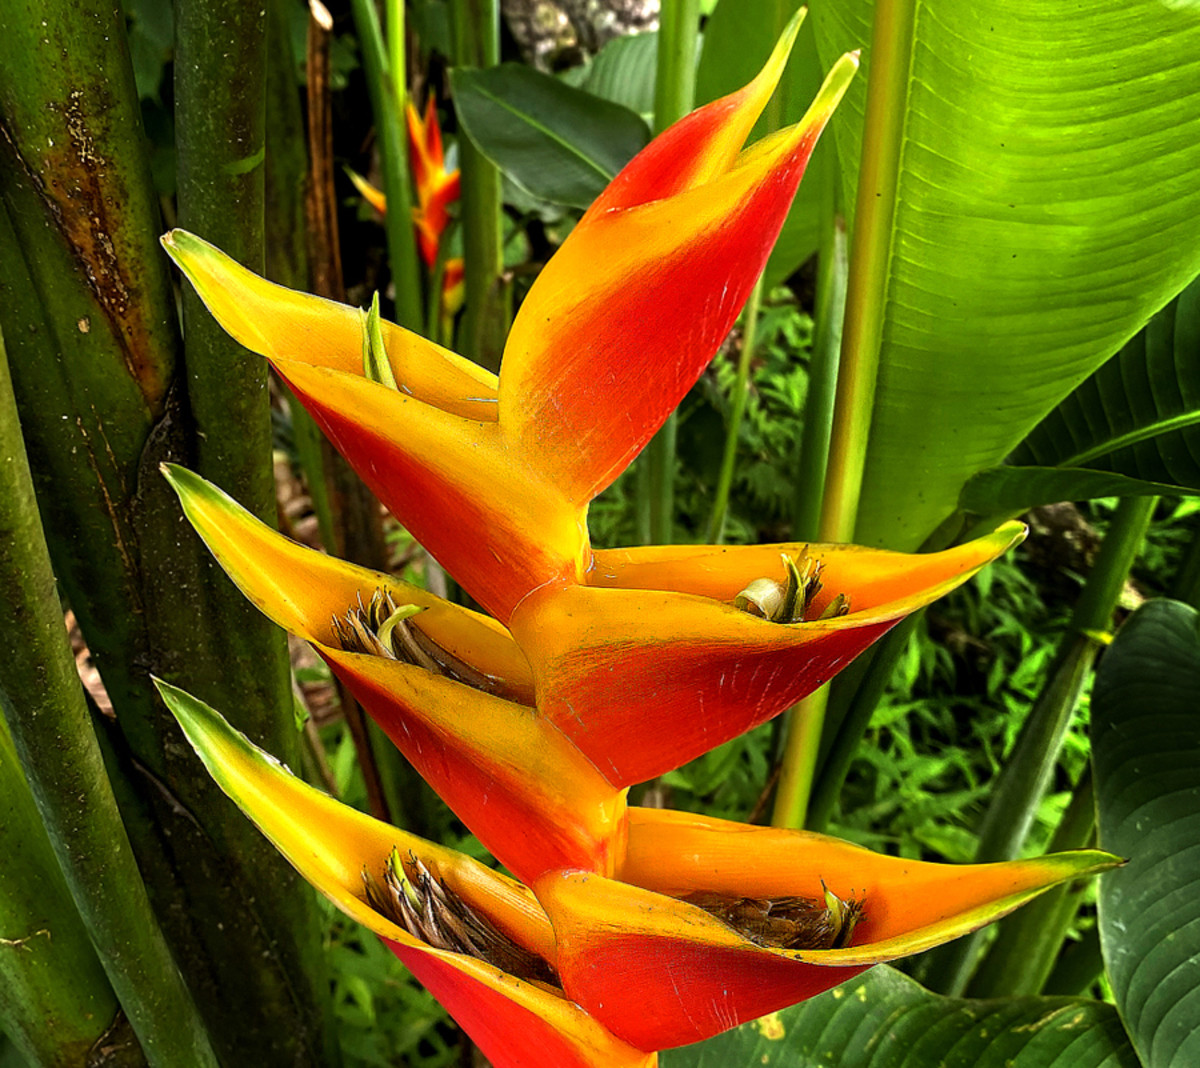 Small, unimpressive flowers can be seen inside the bracts of this Heliconia bihai variety.